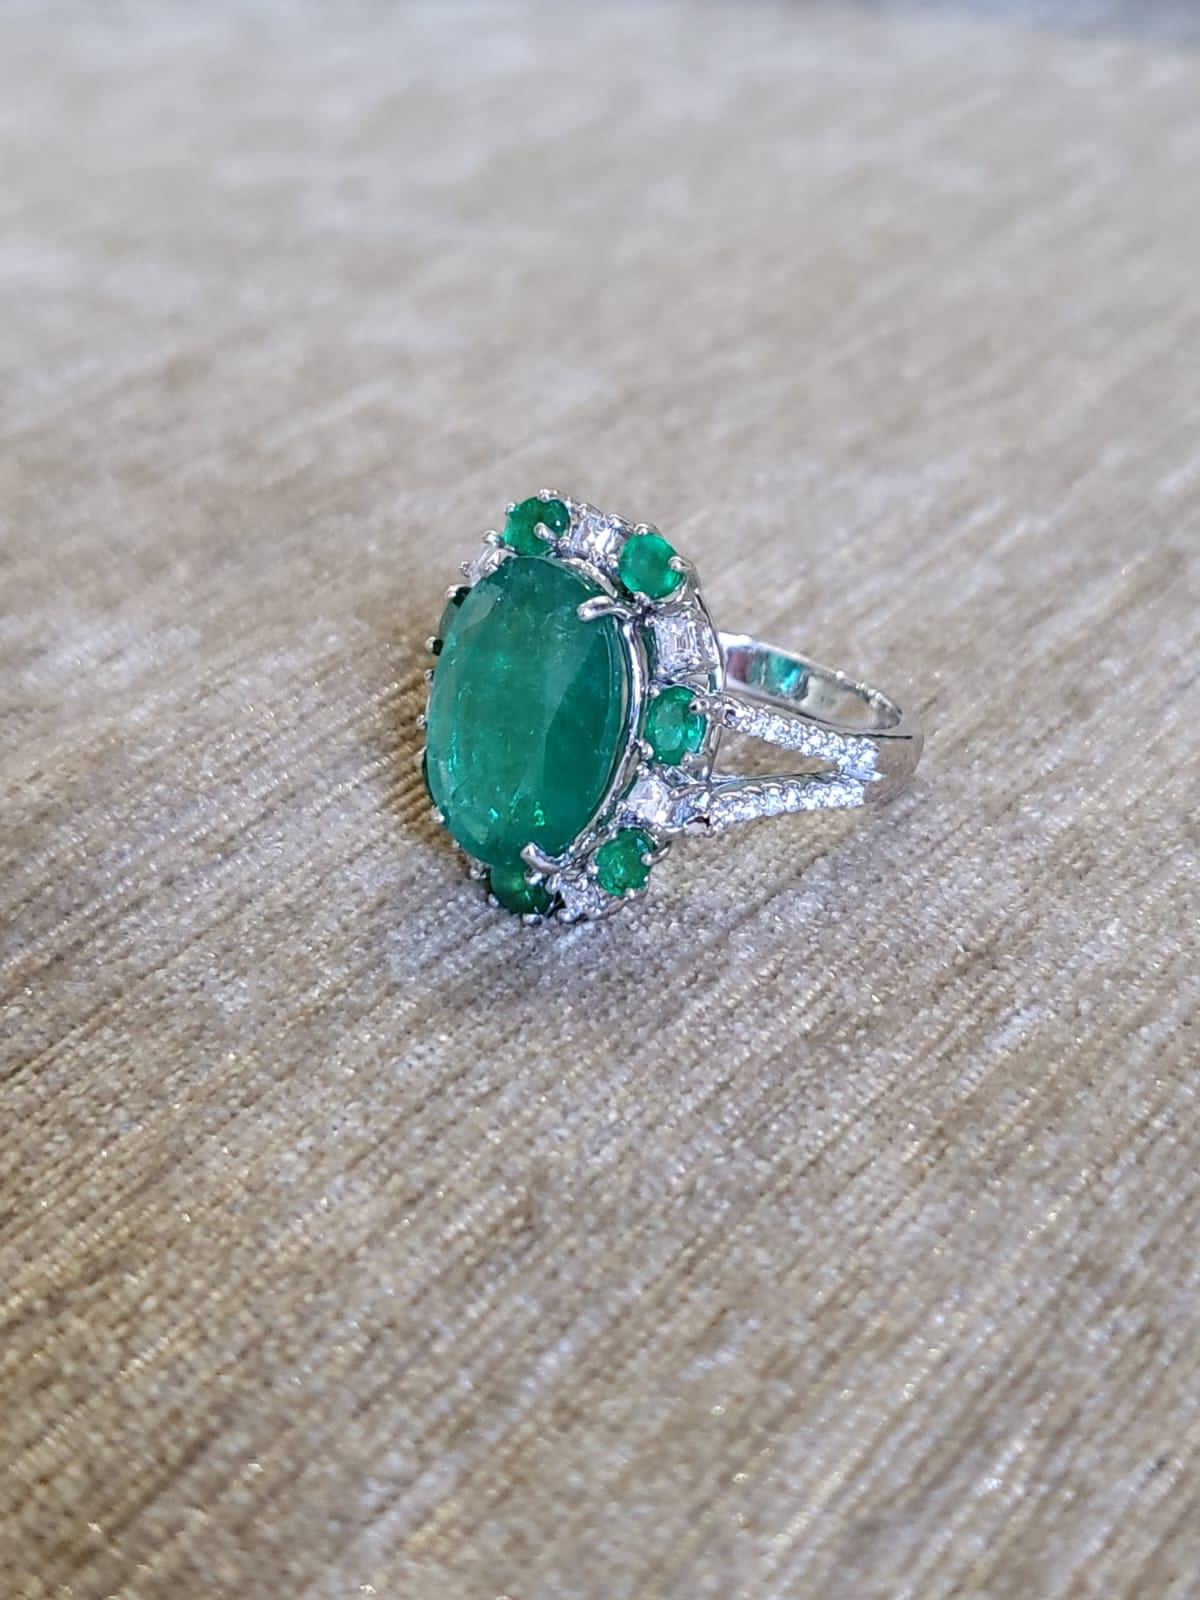 A very gorgeous and one of a kind, Emerald Engagement/ Cocktail Ring set in 18K White Gold & Diamonds. The weight of the centre oval Emerald is 5.90 carats. The weight of the other Emeralds is 0.84 carats. The Emeralds are completely natural,